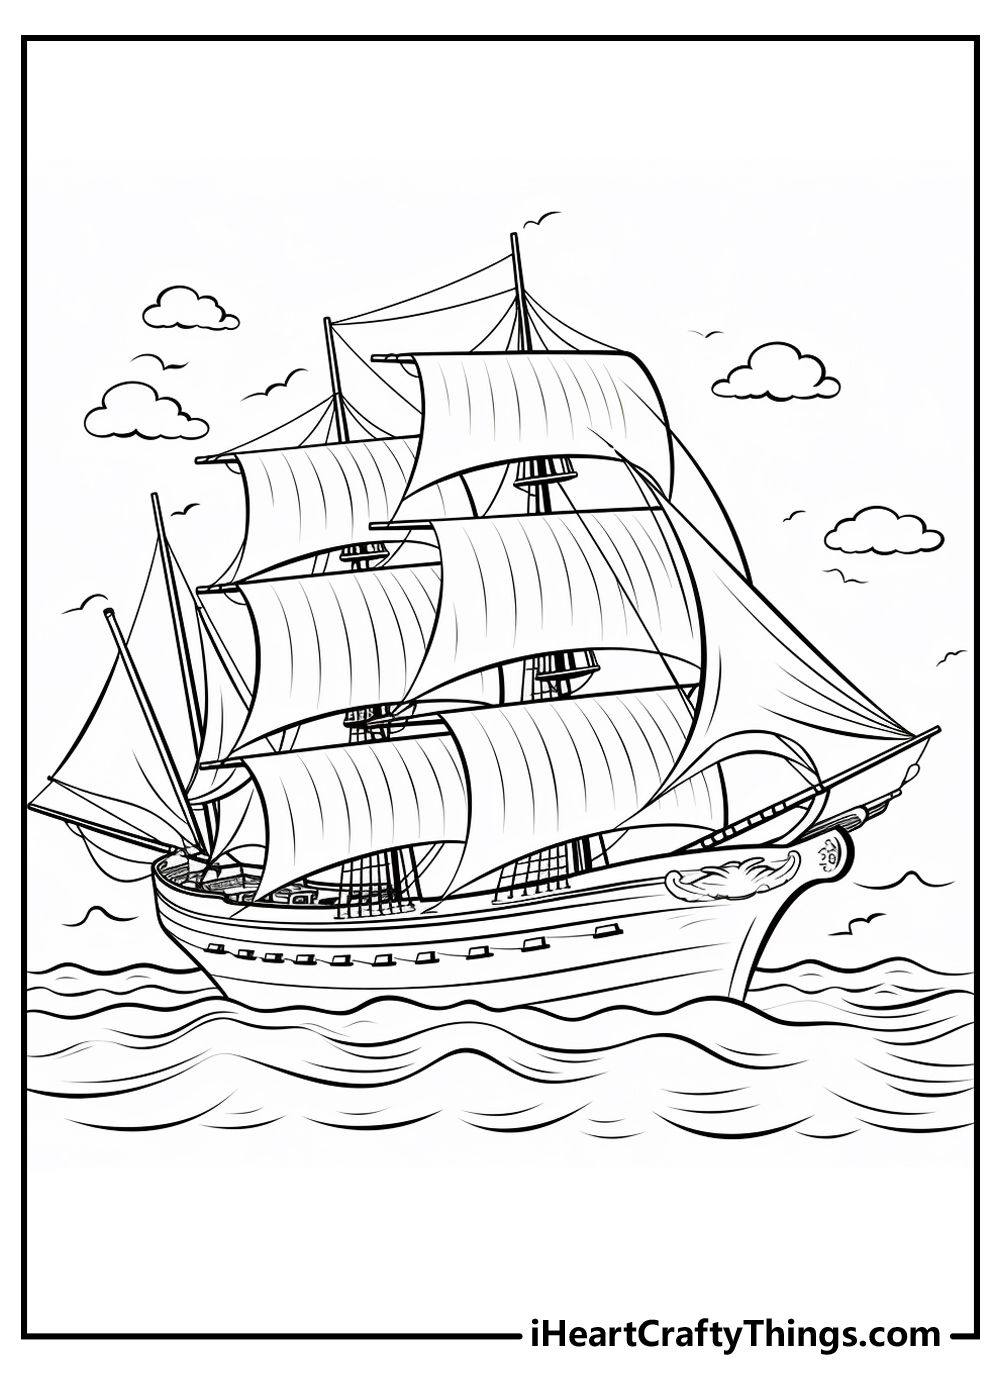 Original Ships and Boat Coloring Pages for Kids